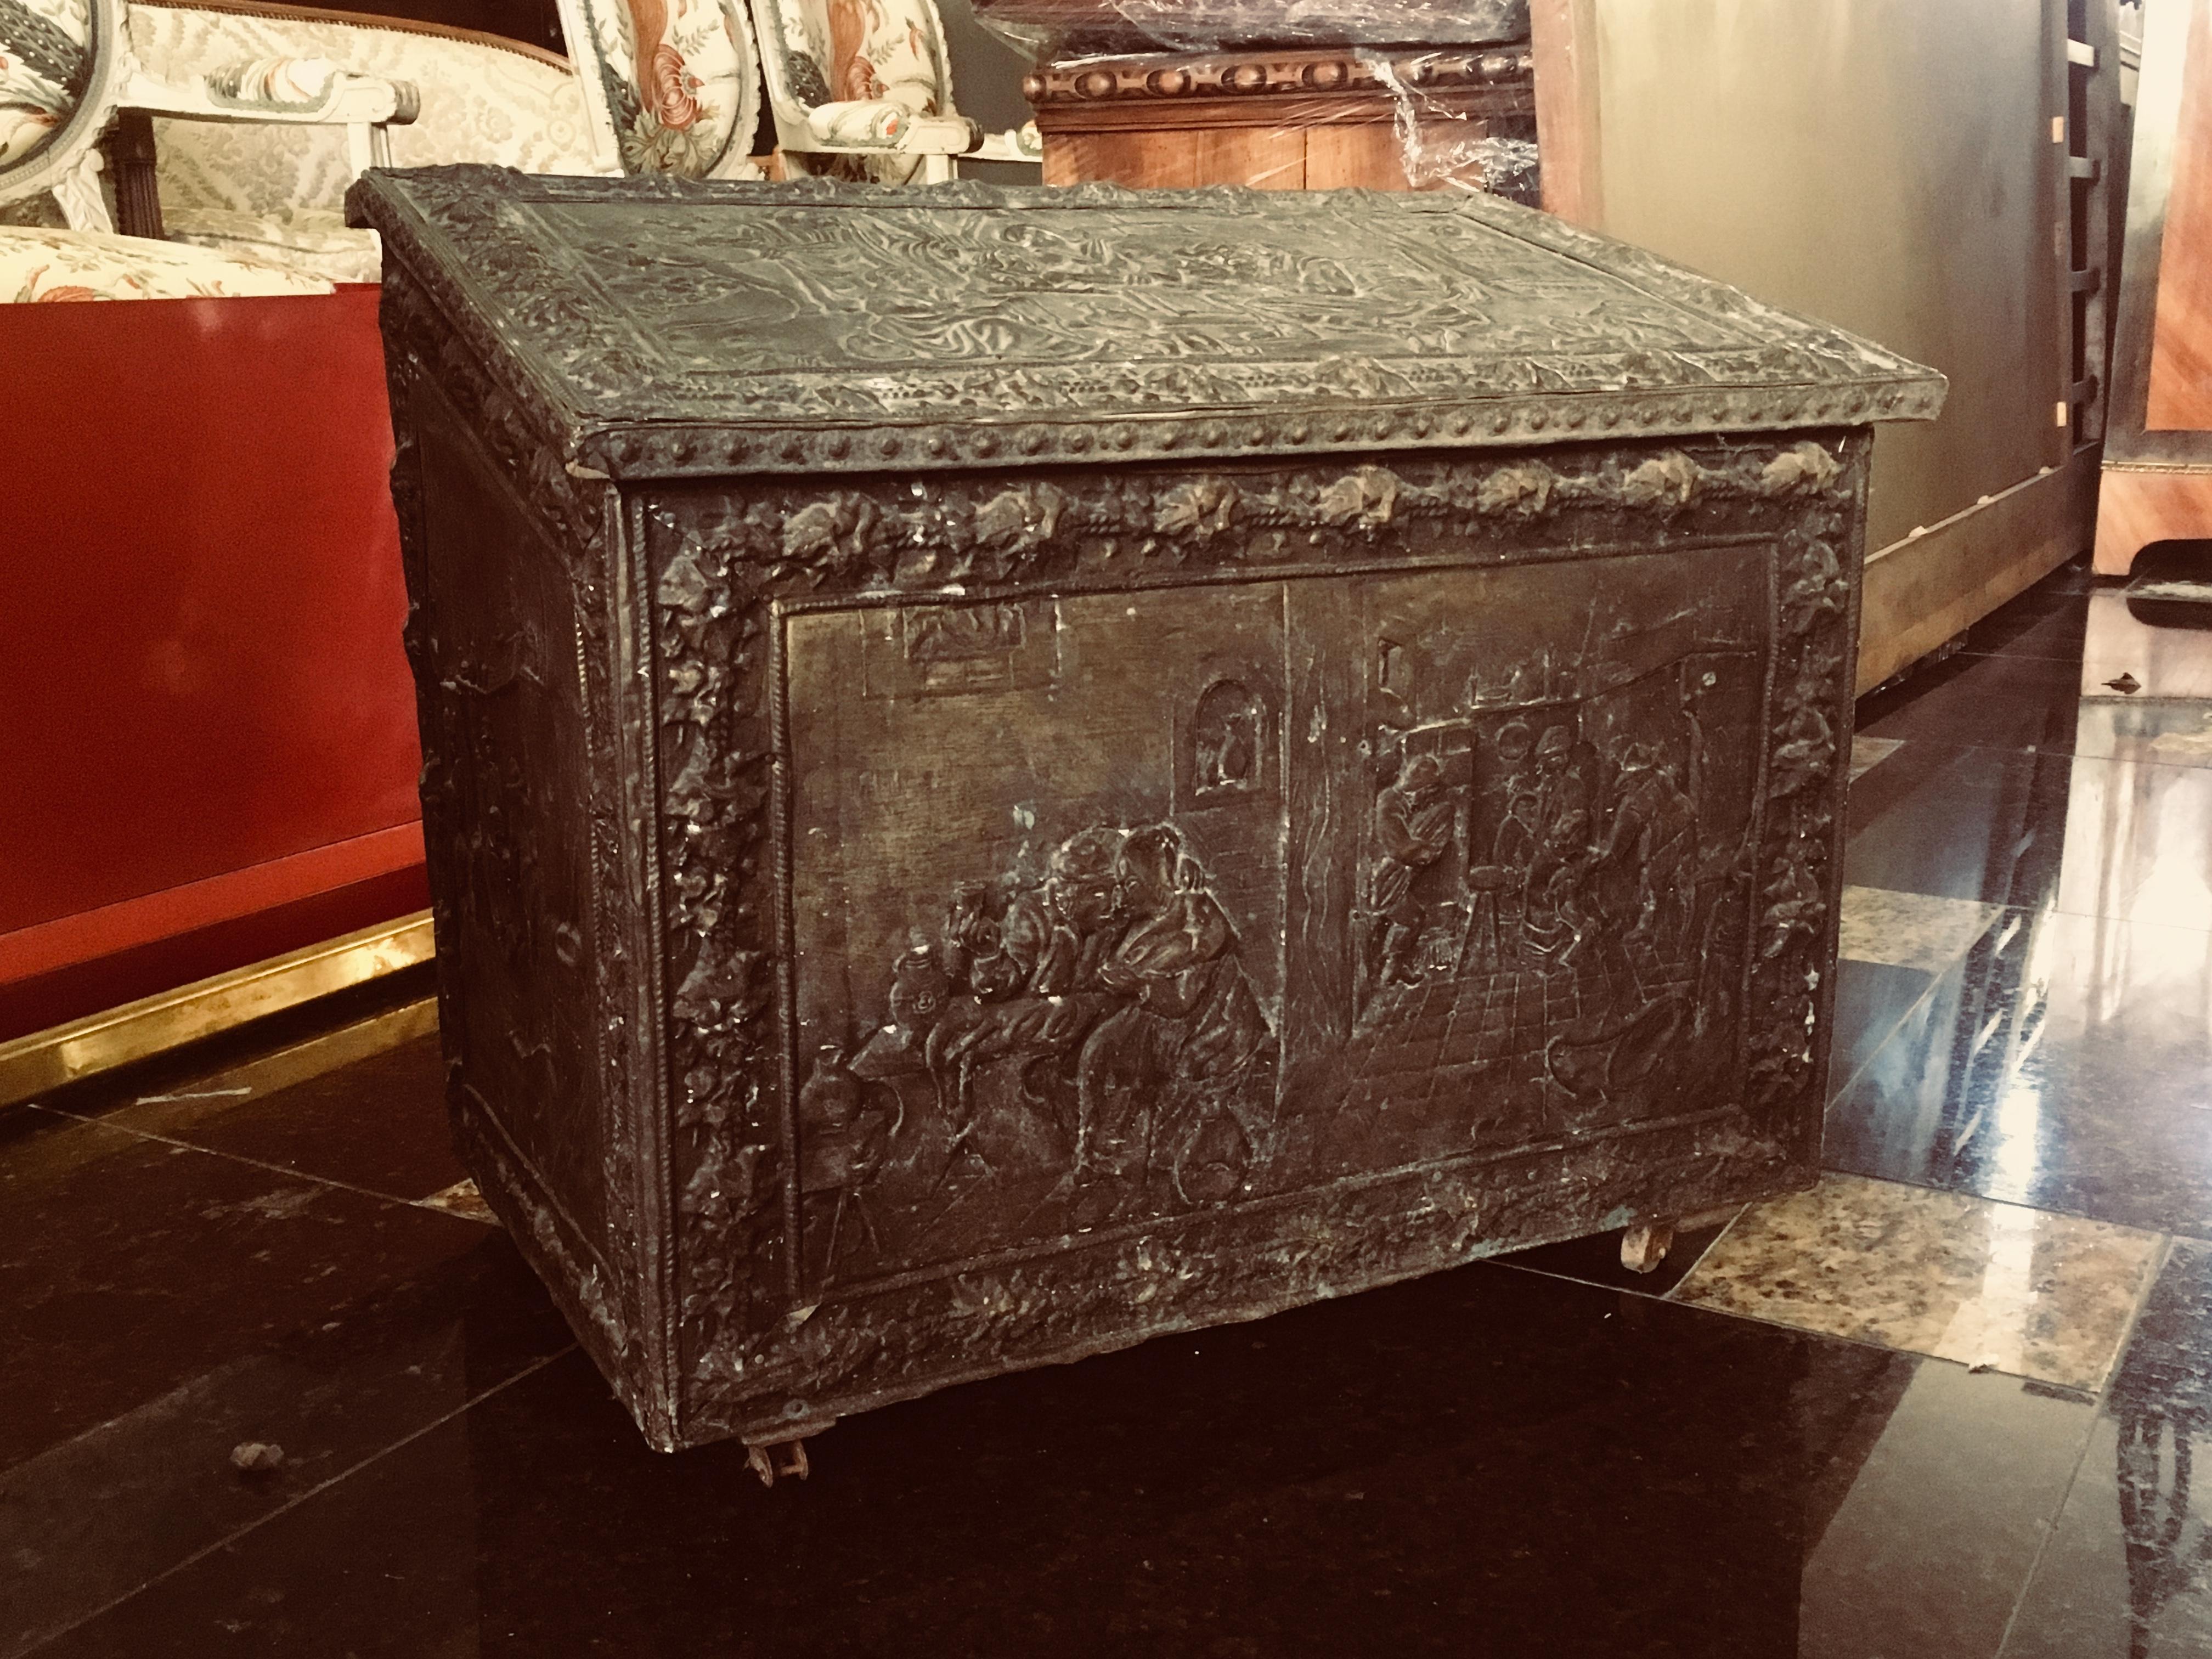 This is an 18th century French wooden coffer or trunk or blanket chest, with rich wrought iron decoration from all the sides and has a great patina too. 
France, circa 1770.